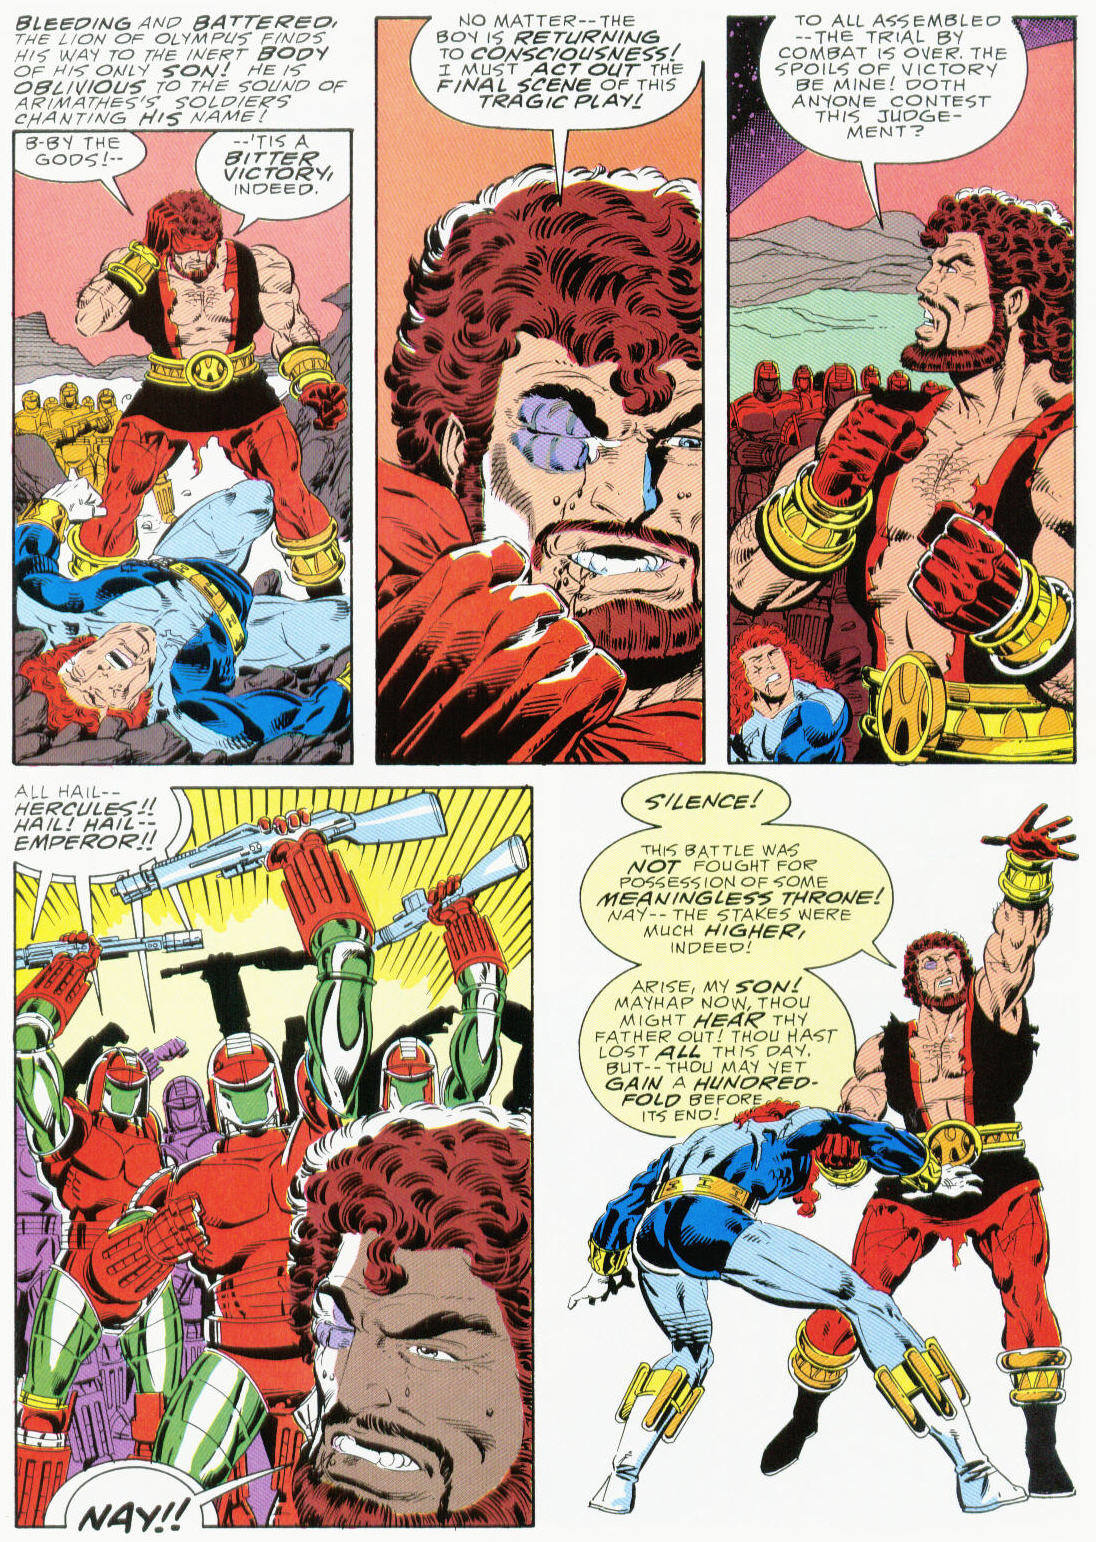 Marvel Graphic Novel issue 37 - Hercules Prince of Power - Full Circle - Page 75